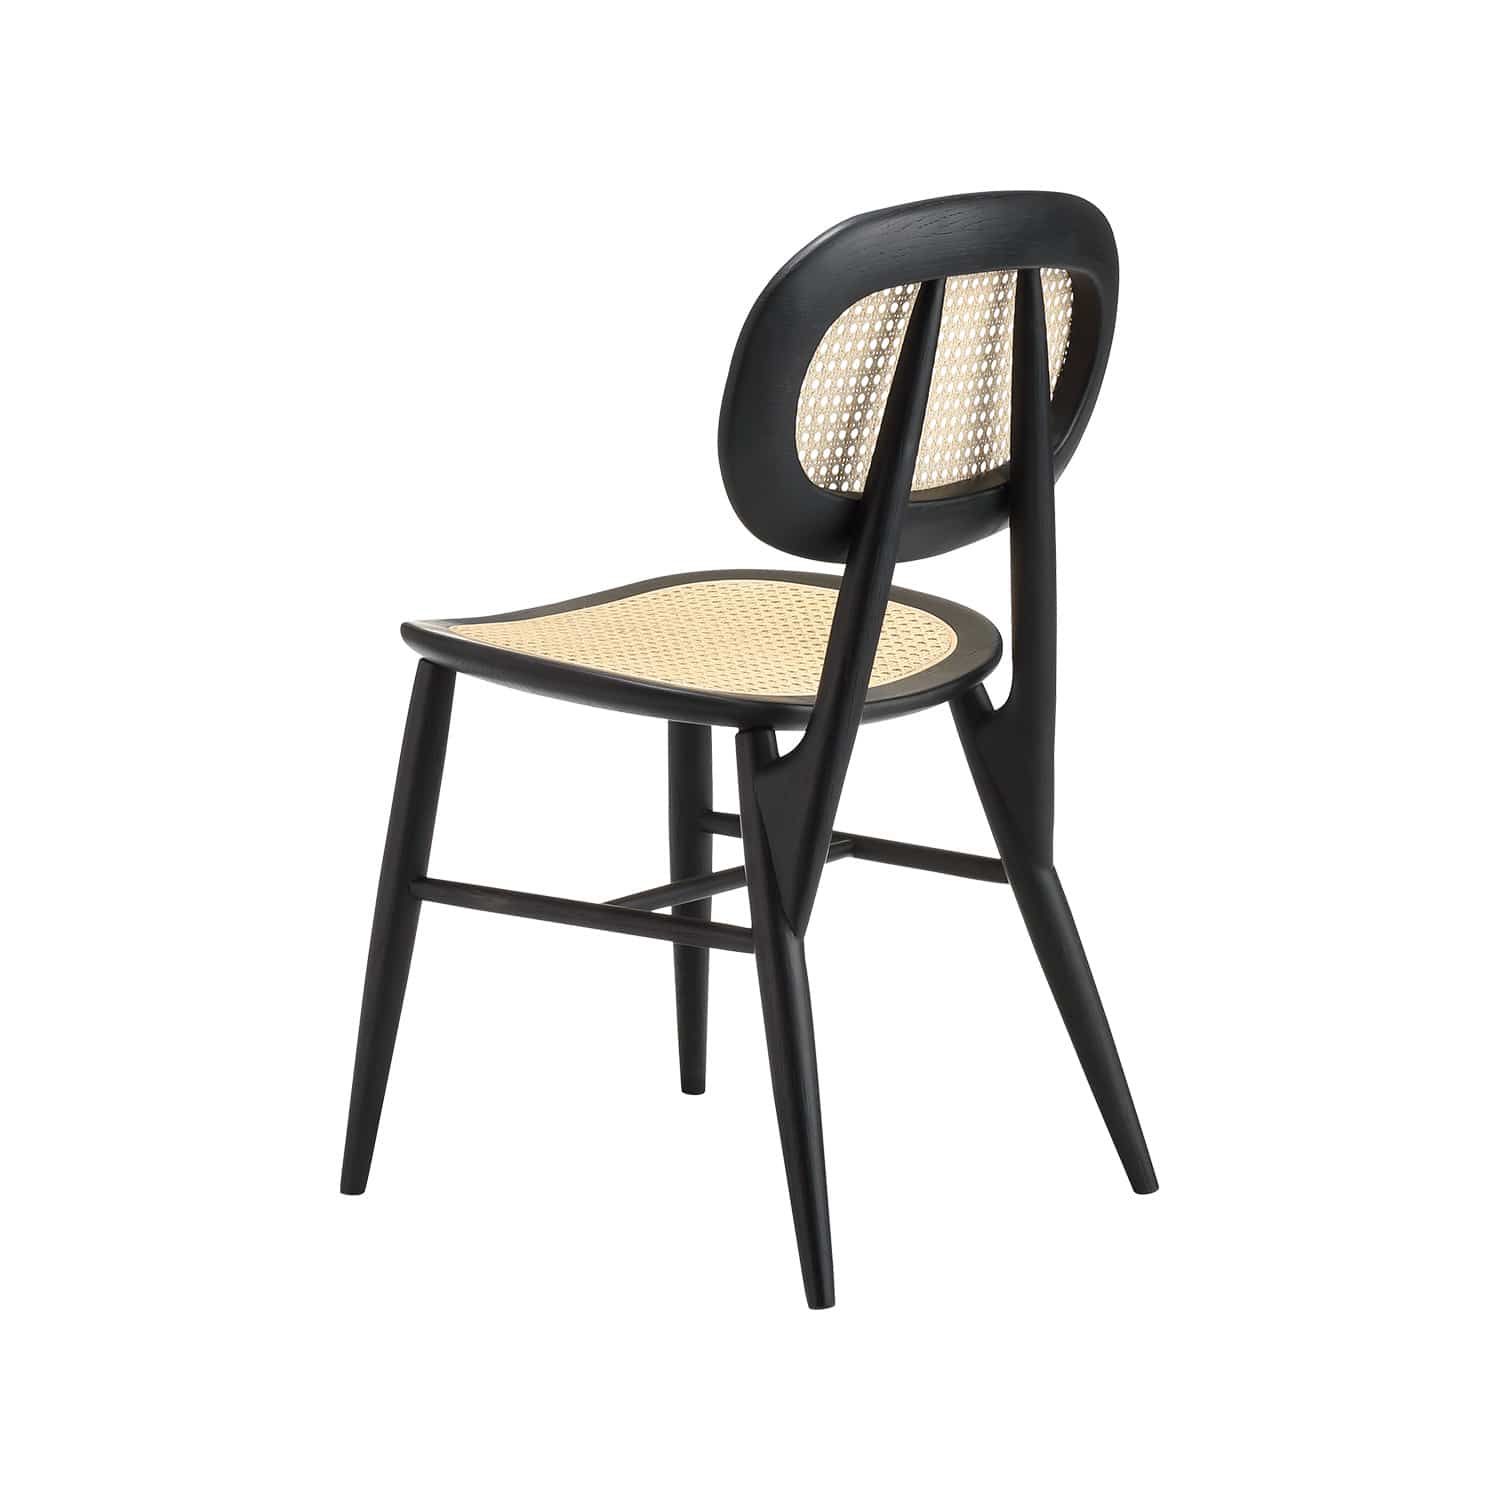 CONVENTO CHAIR Black｜リビング・ダイニングチェア｜IDEE SHOP Online